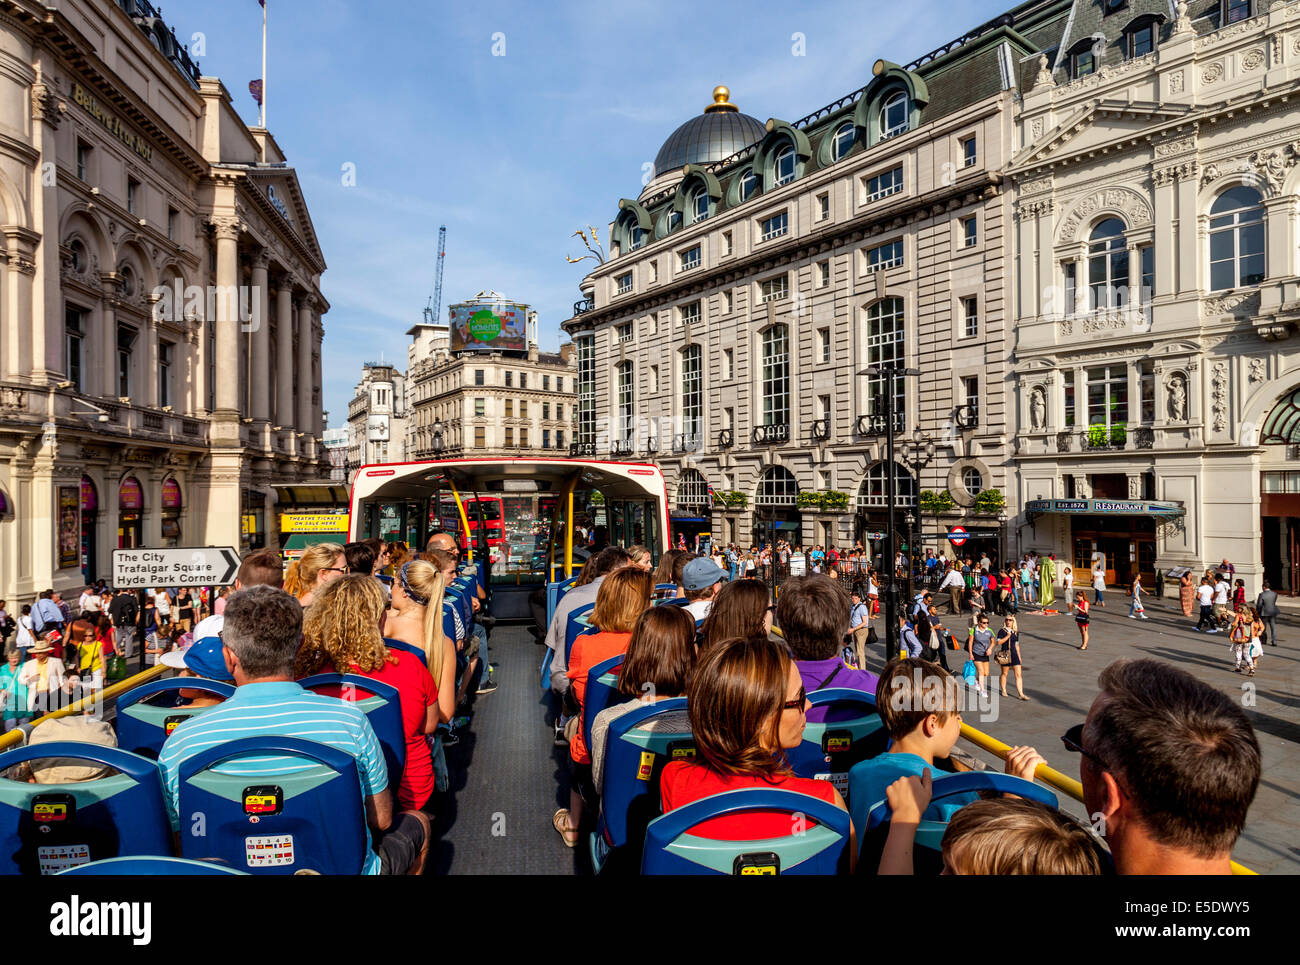 A London Tour Bus Passes By Piccadilly Circus, London, England Stock Photo